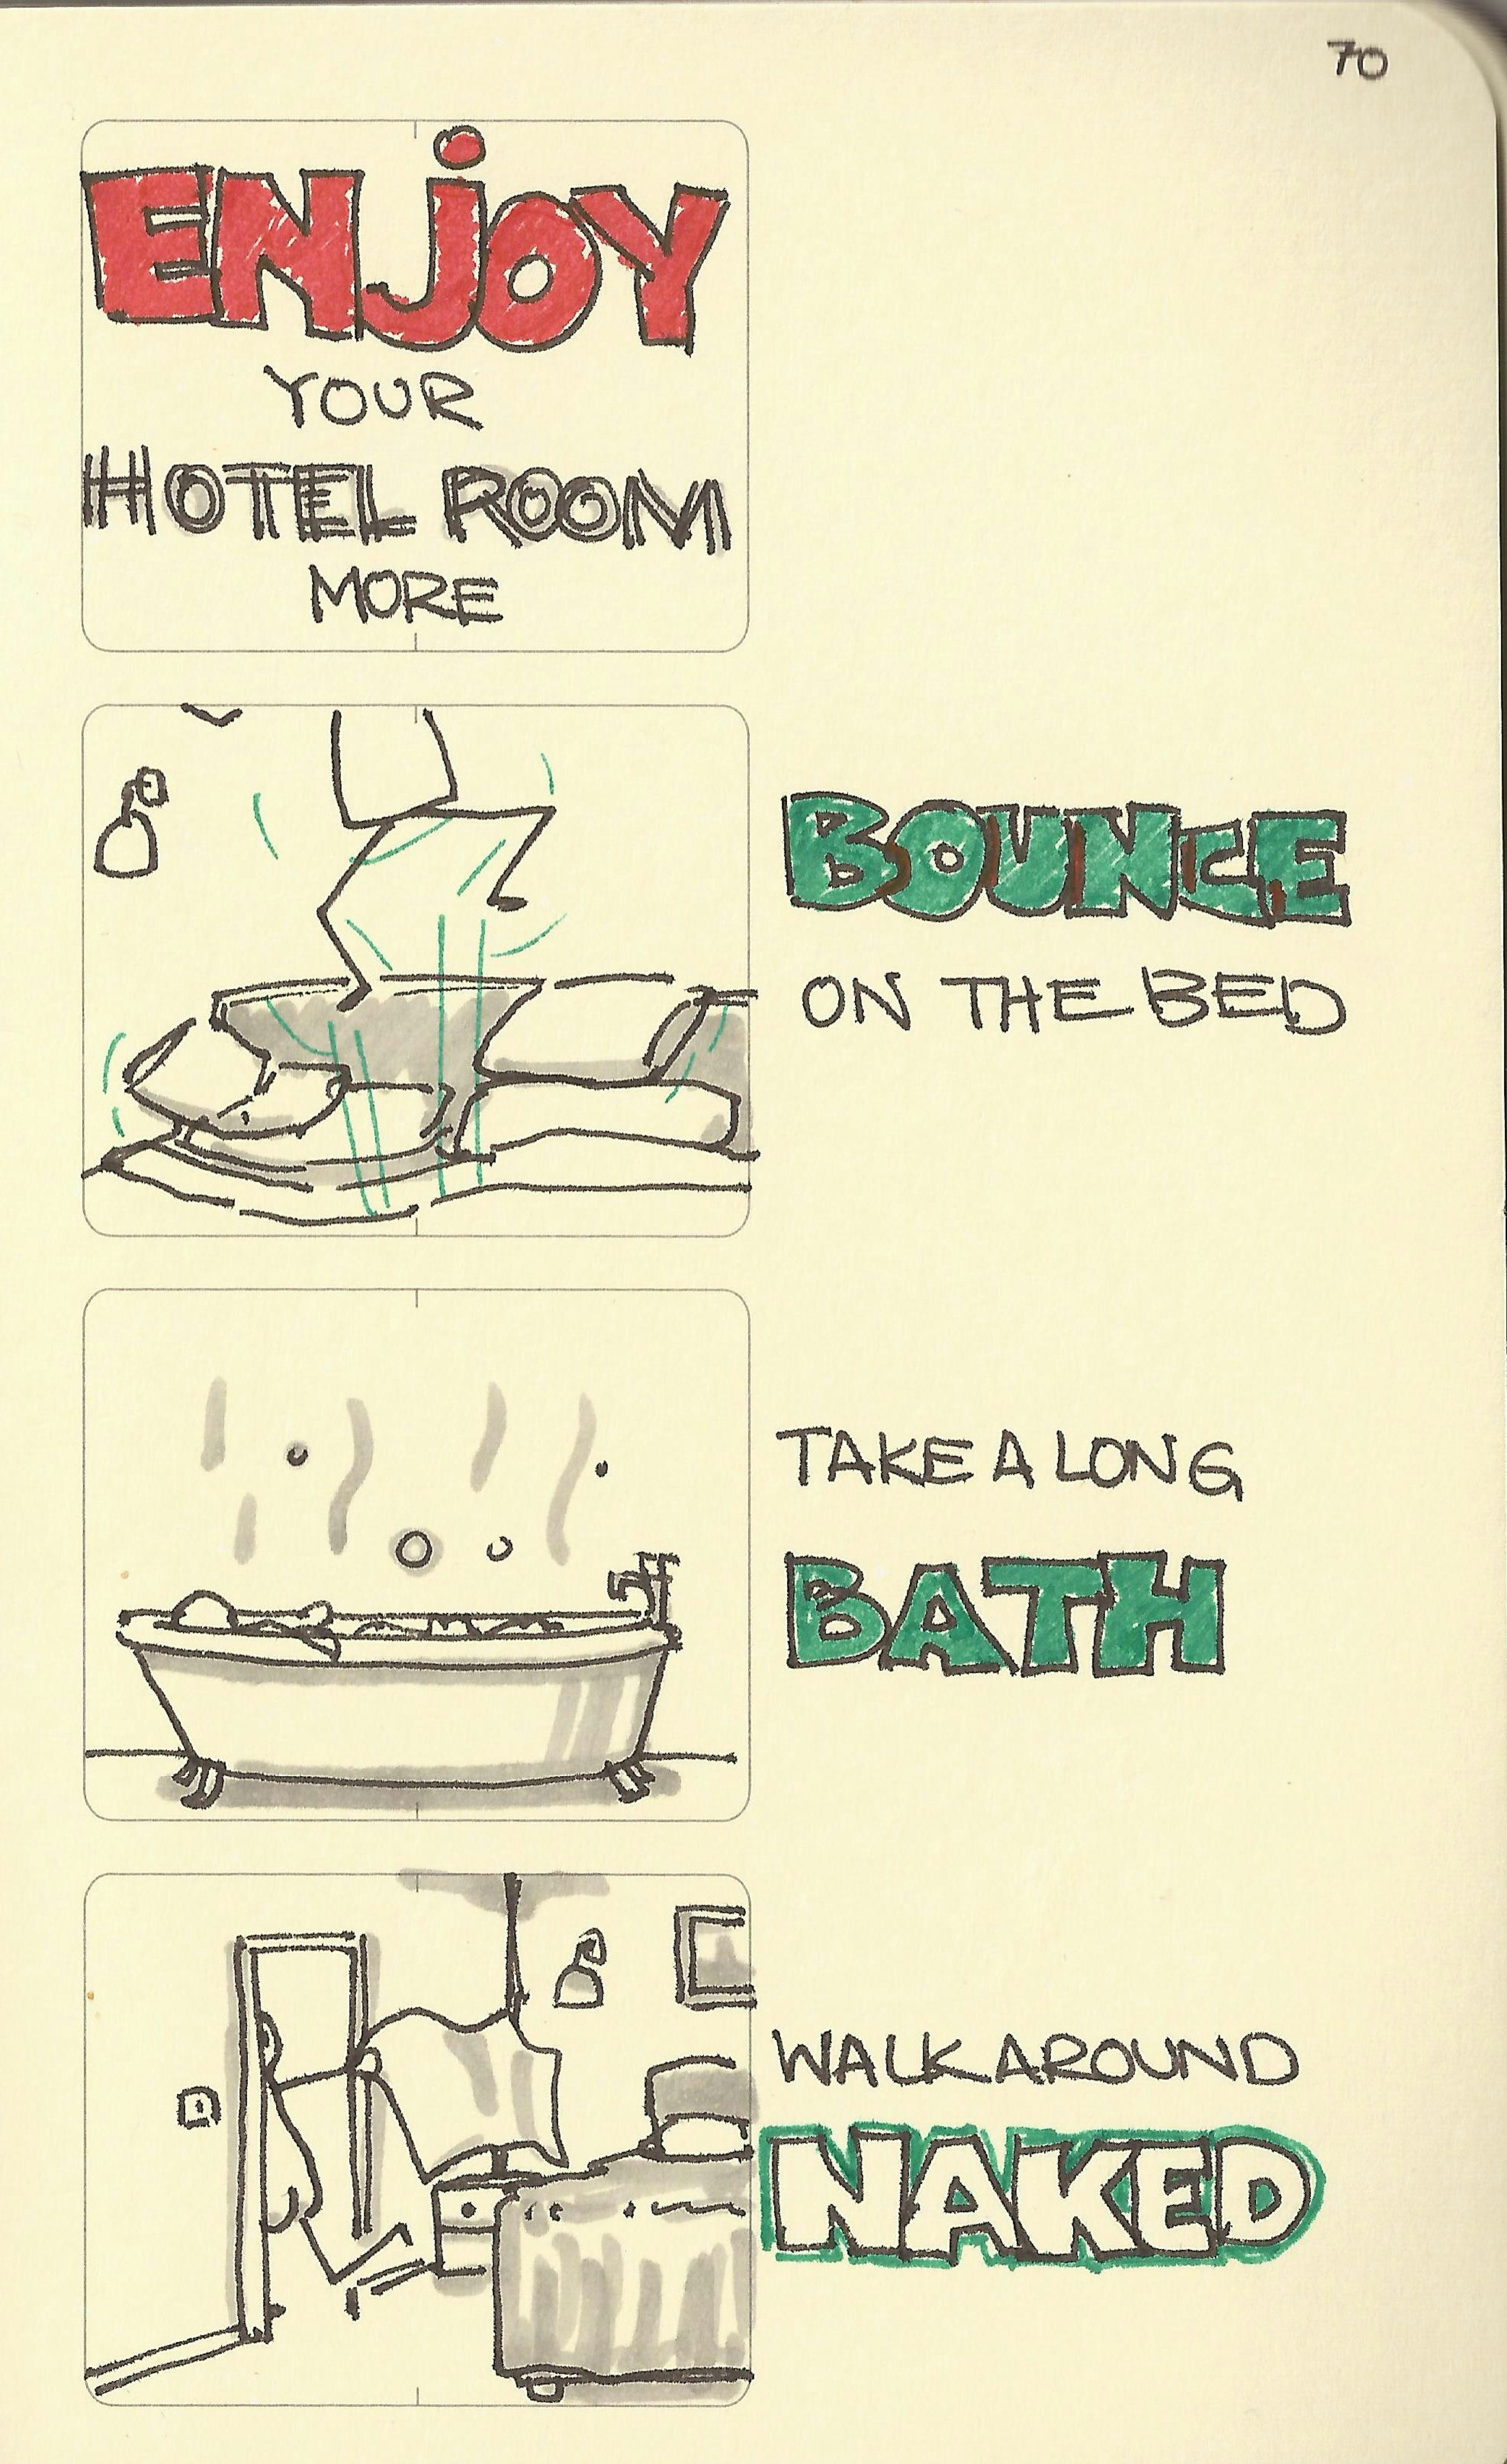 Enjoy your hotel room more: bounce on the bed, take a long bath, walk around naked